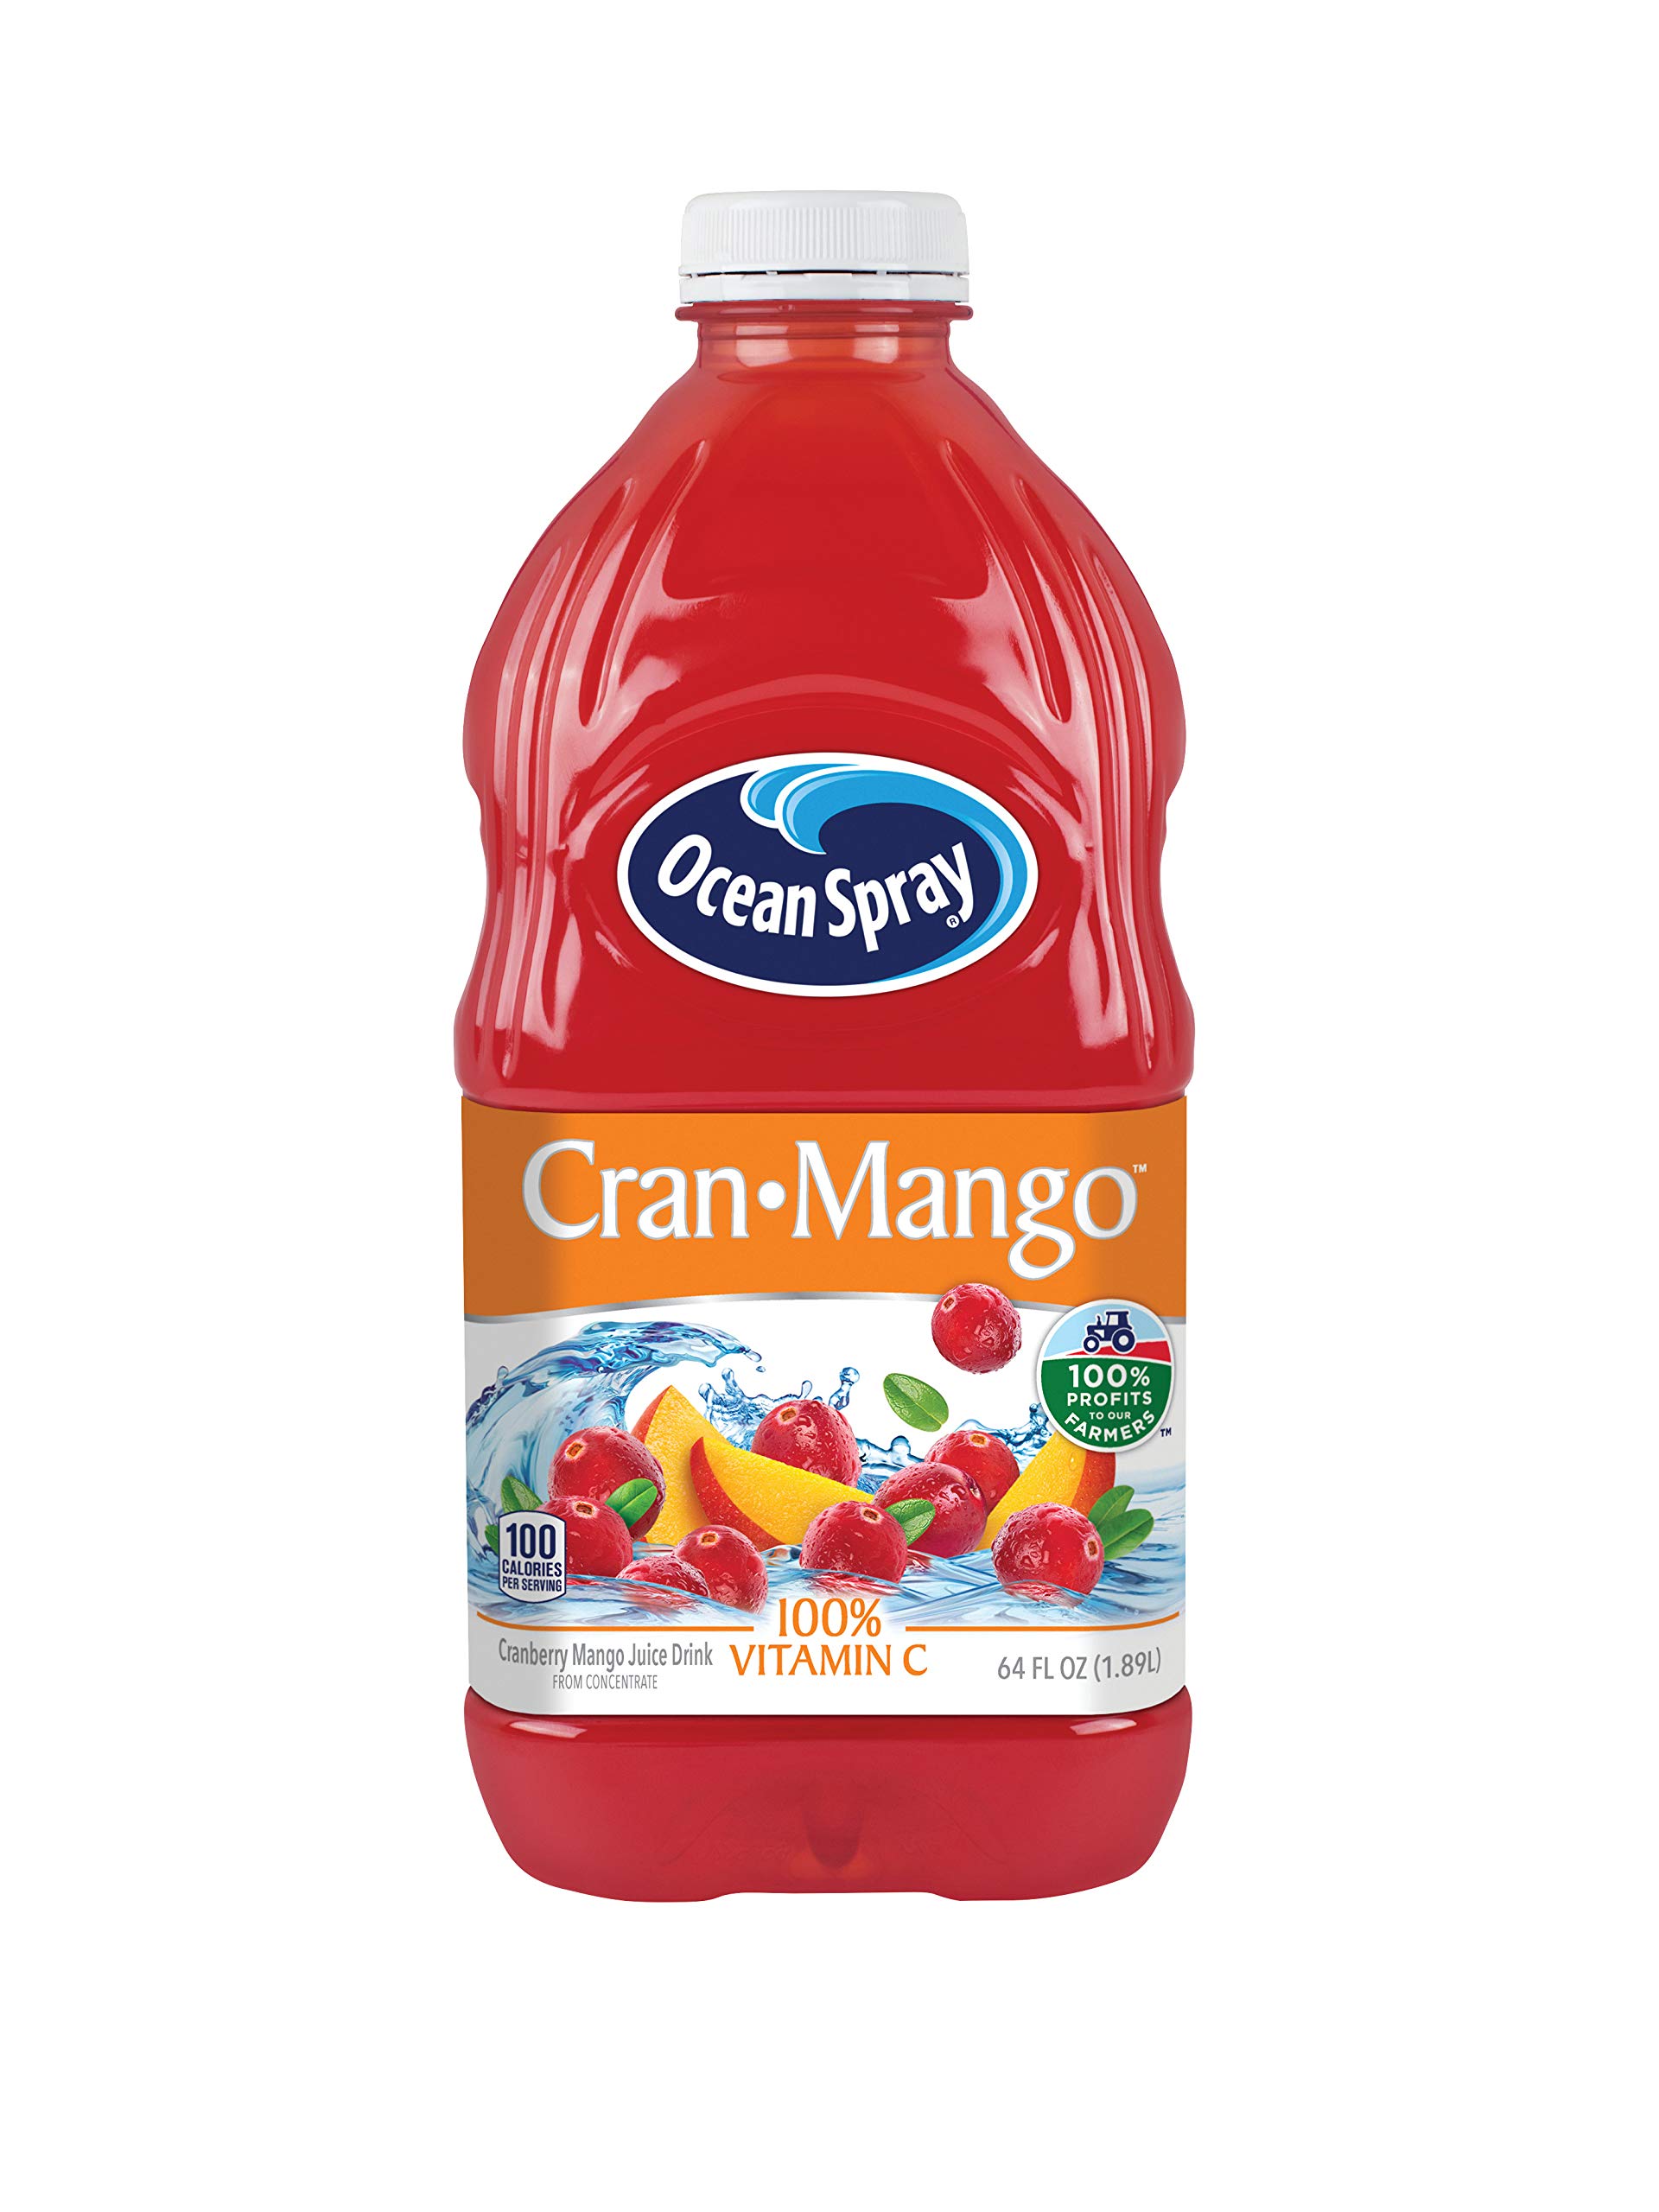 64-Oz Ocean Spray Cranberry Mango Juice Drink $2.50 + Free Shipping w/ Prime or on orders over $35